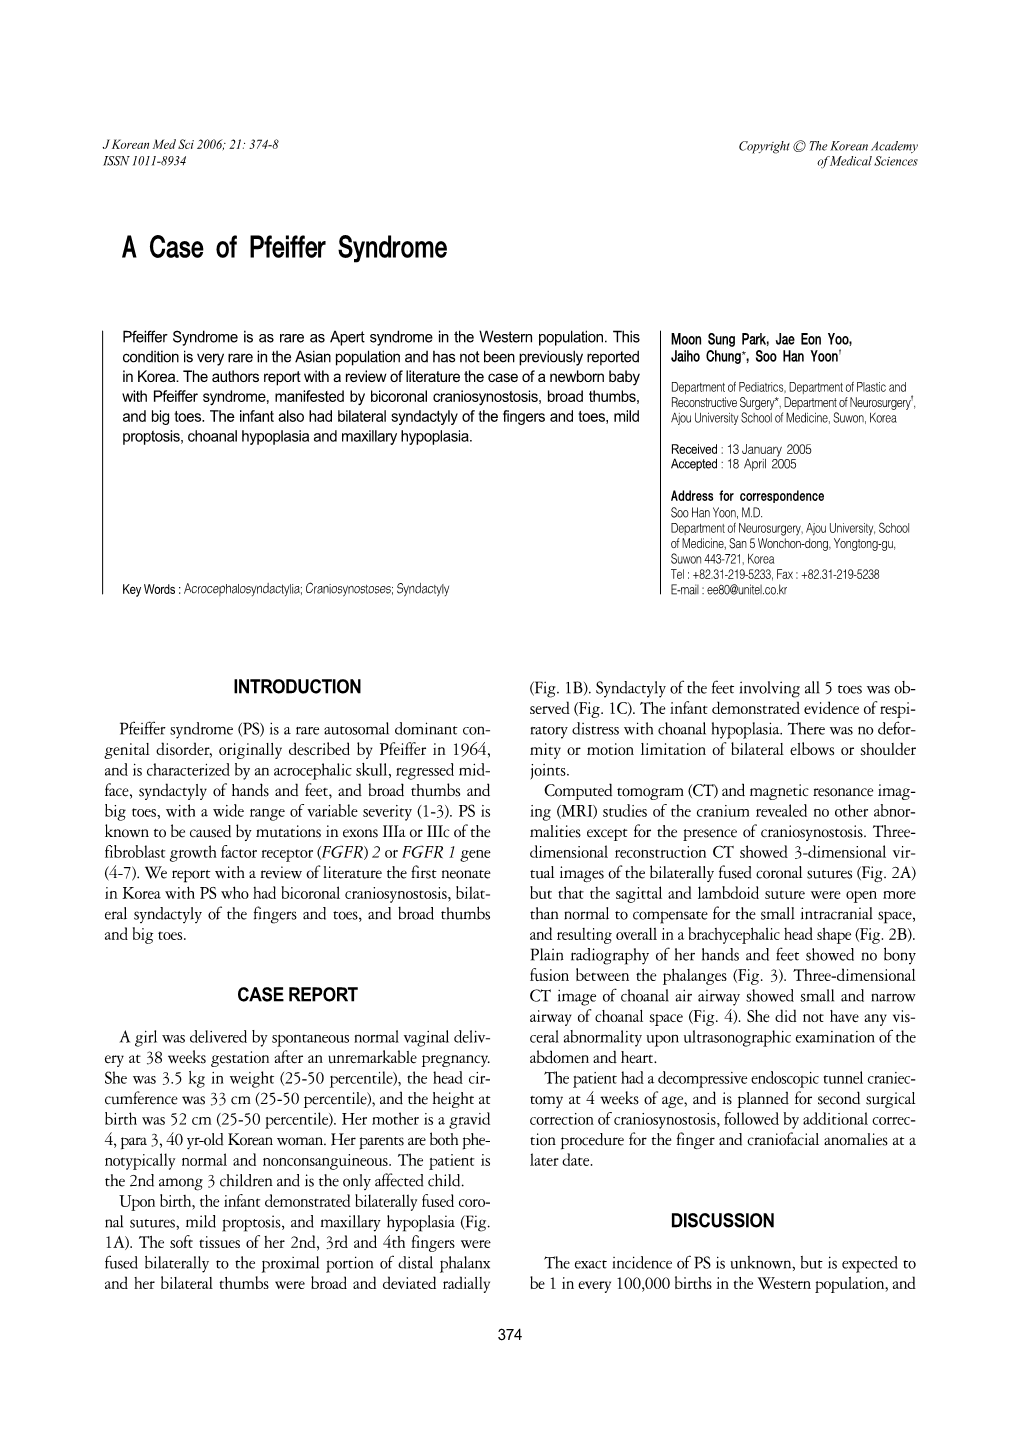 A Case of Pfeiffer Syndrome